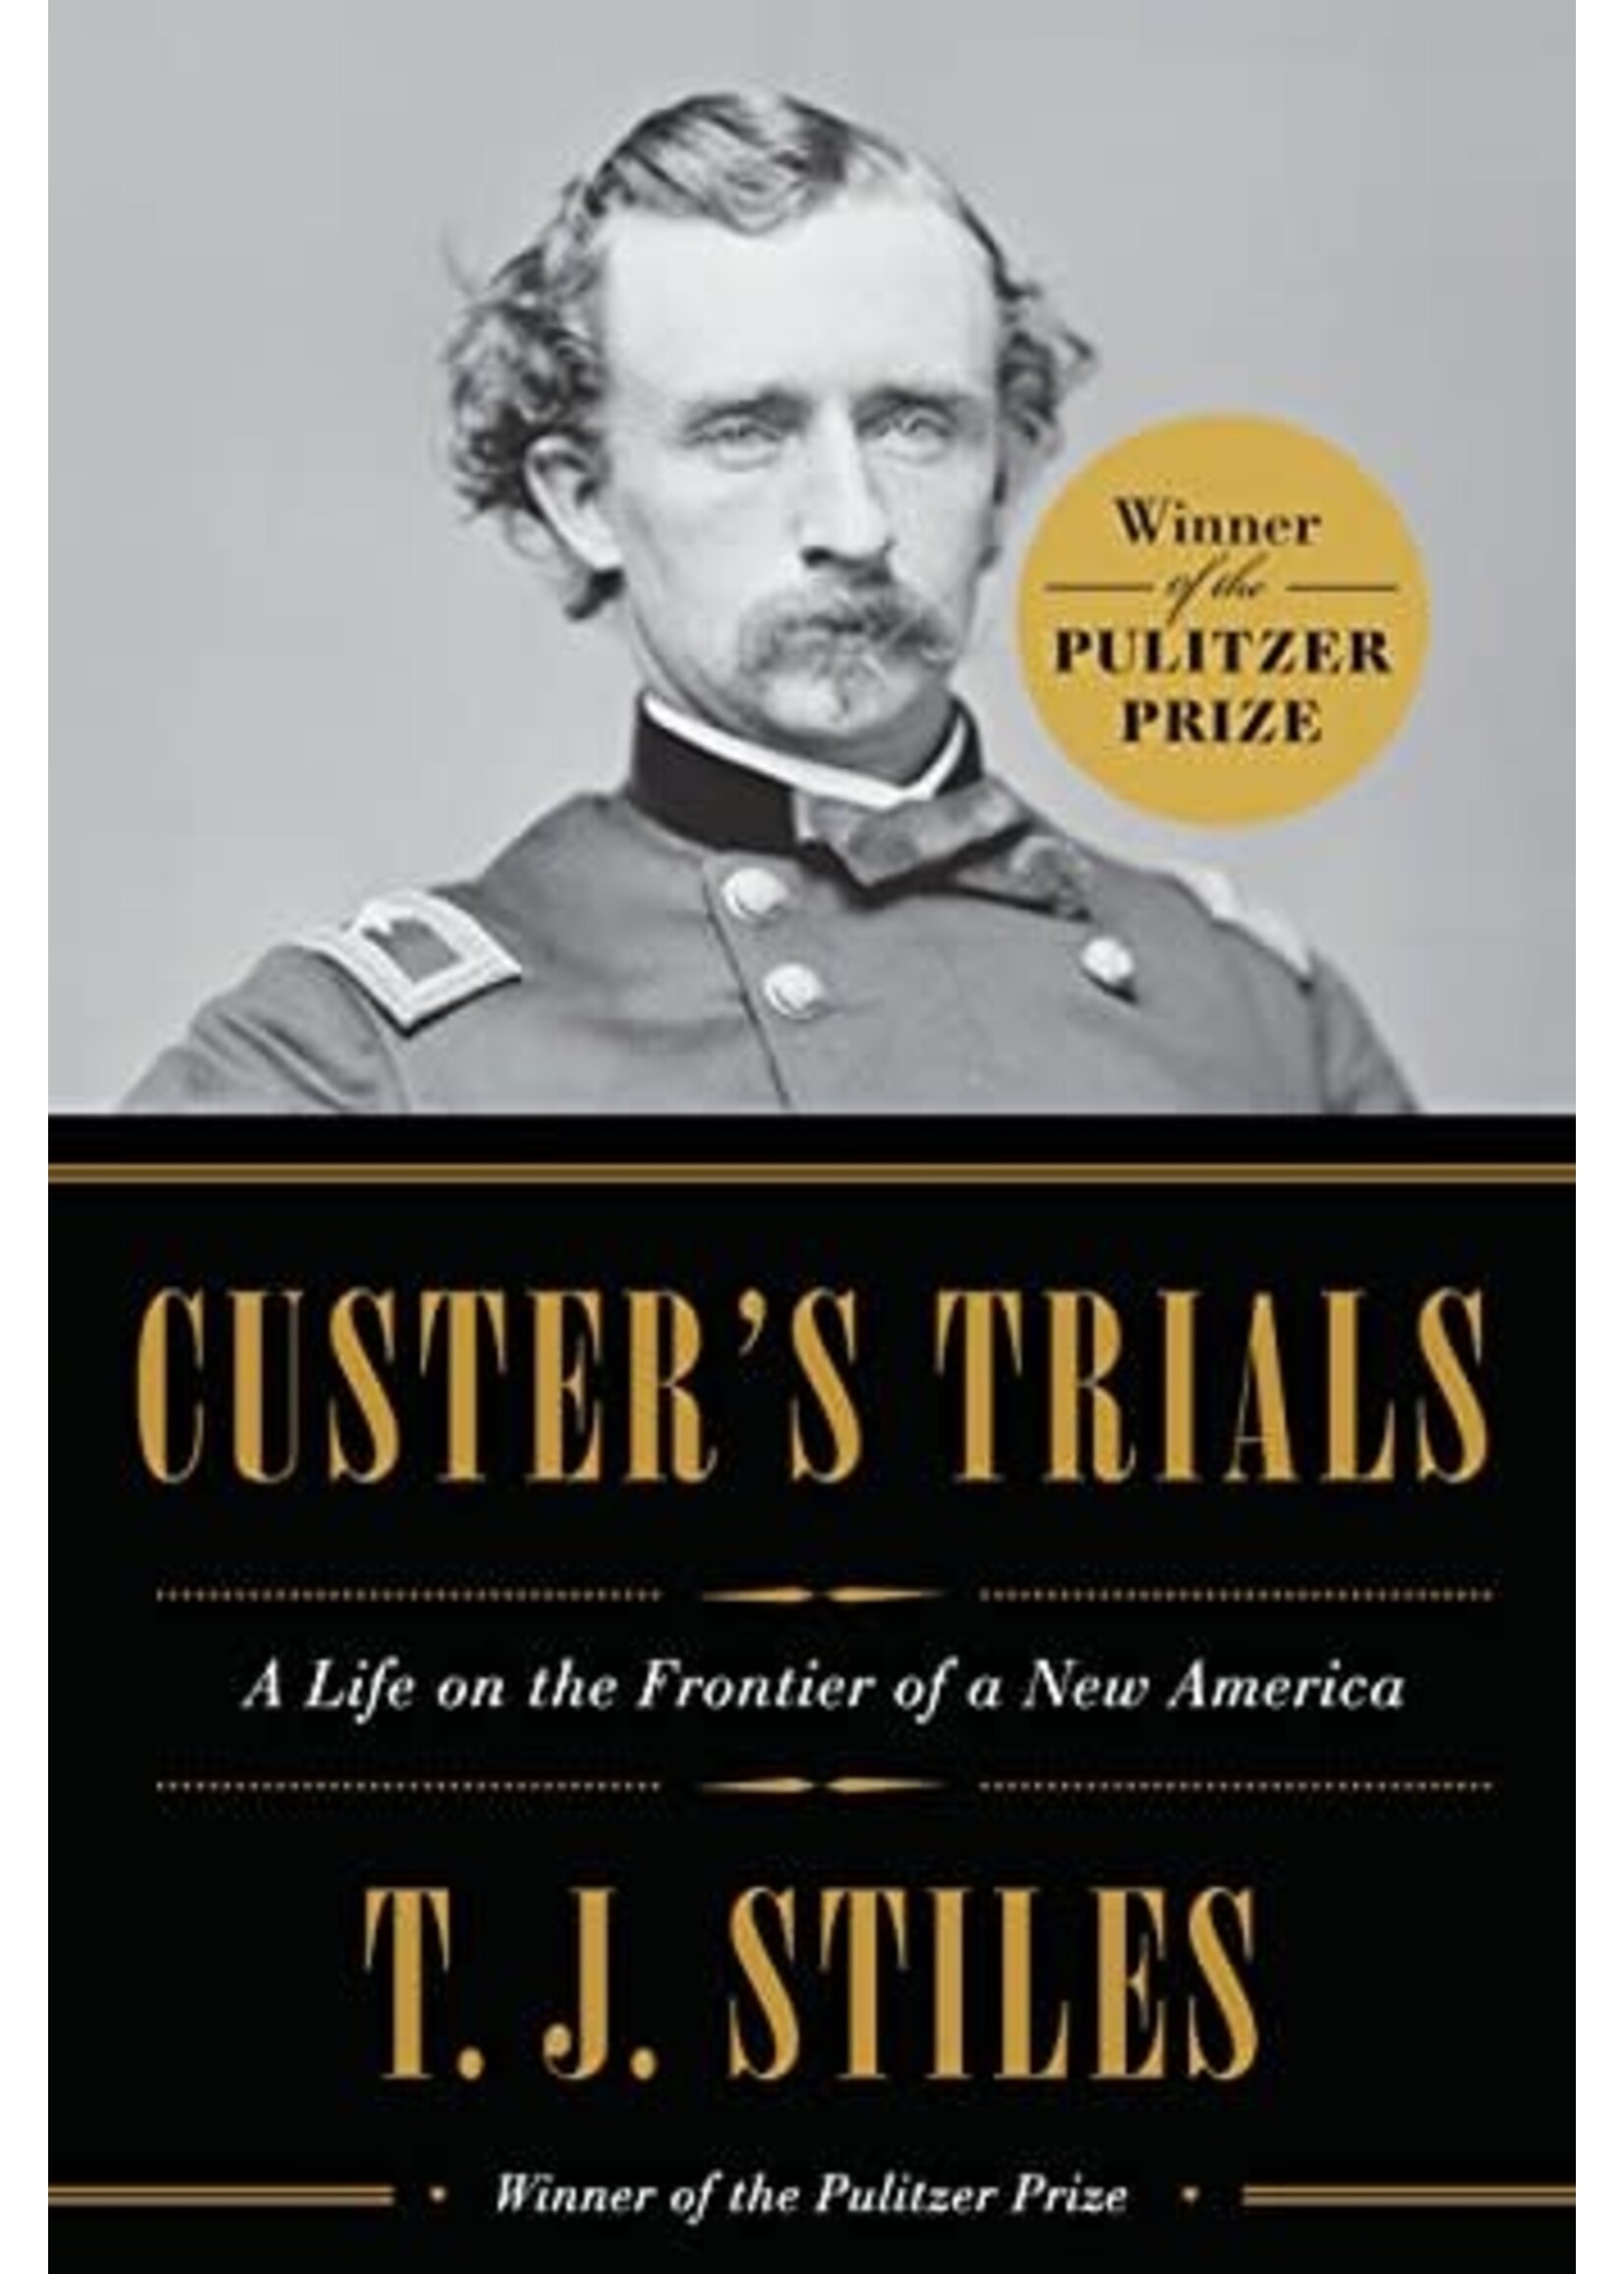 Custers Trials: A Life on the Frontier of New America